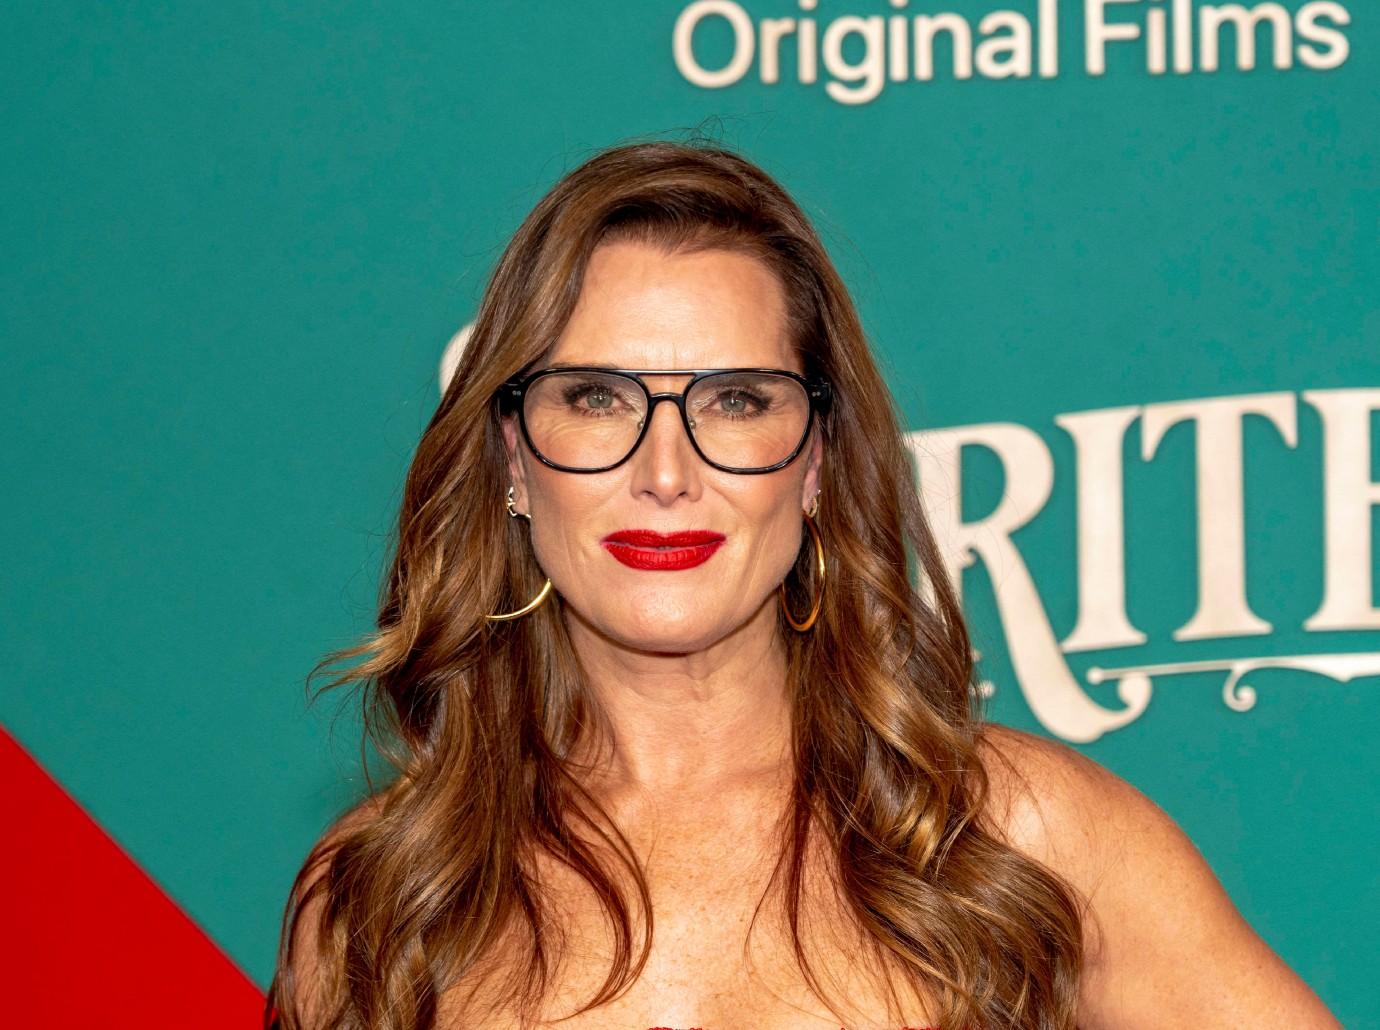 Brooke Shields looks pensive as she's seen after revealing her